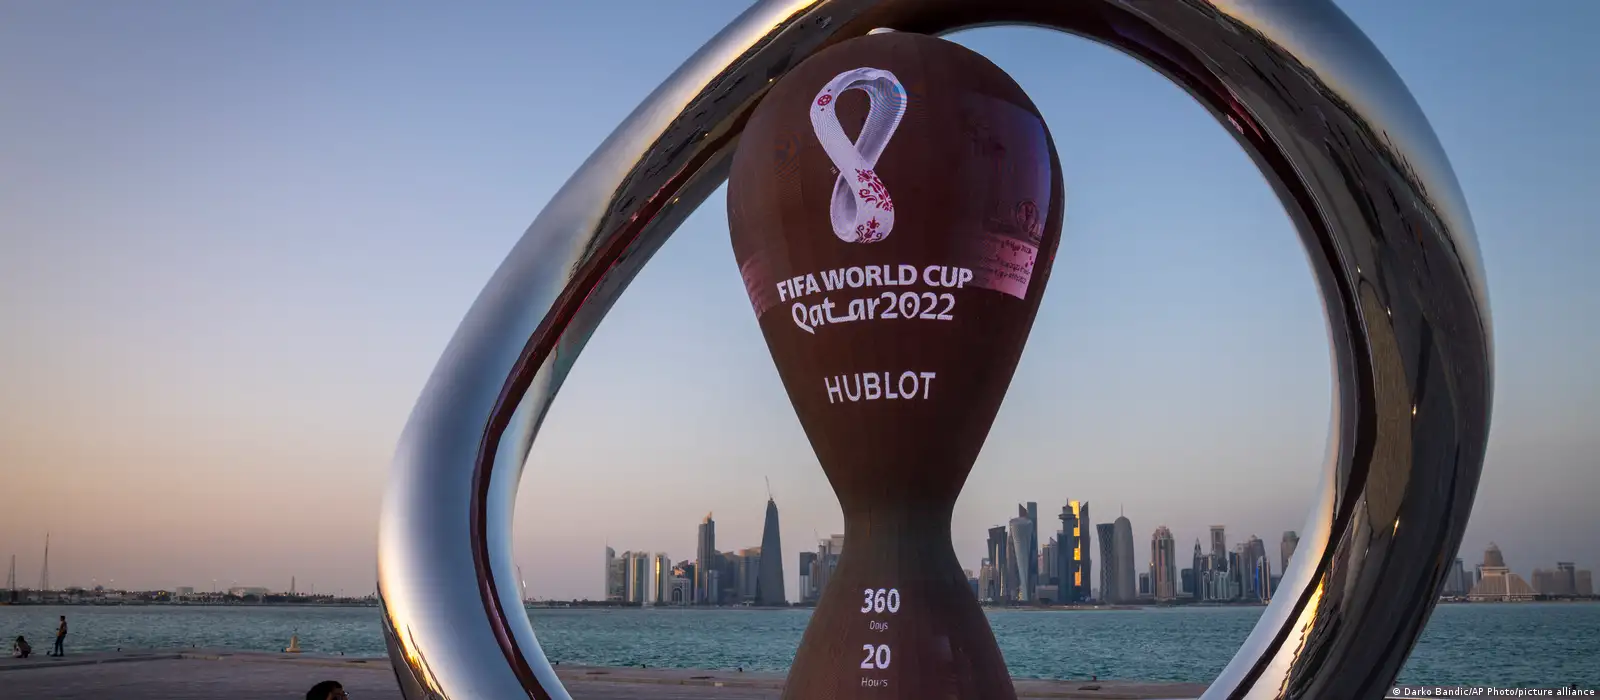 FIFA announces shared flights for Israeli and Palestinian football fans for  2022 World Cup in Qatar